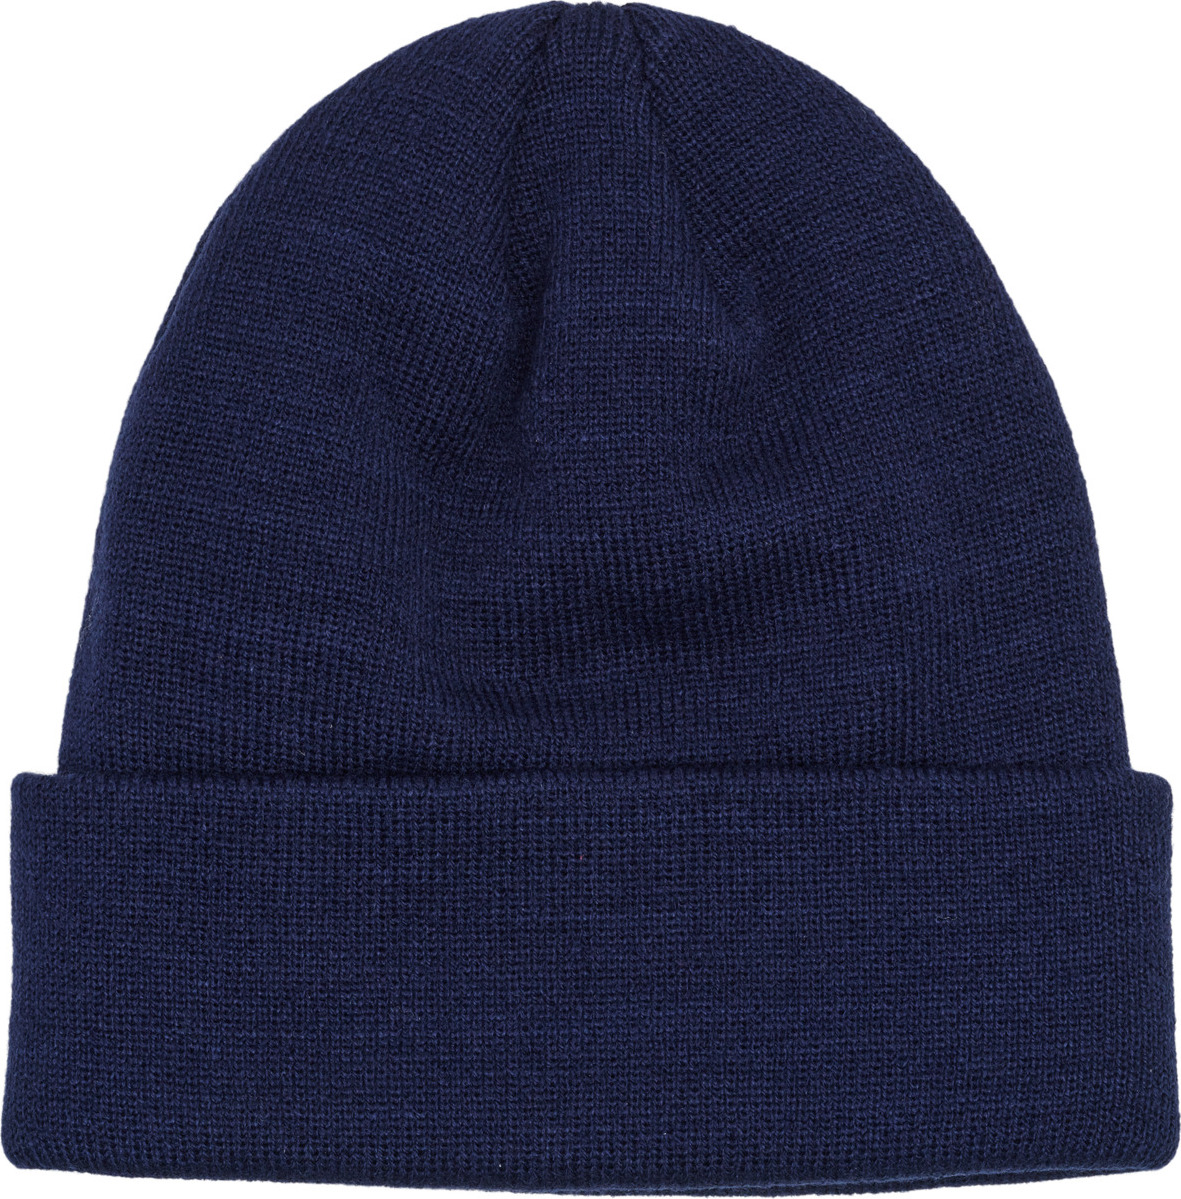 Peacoat Outnorth Core Core Peacoat | | here hmlLEGACY hmlLEGACY Beanie Buy Beanie